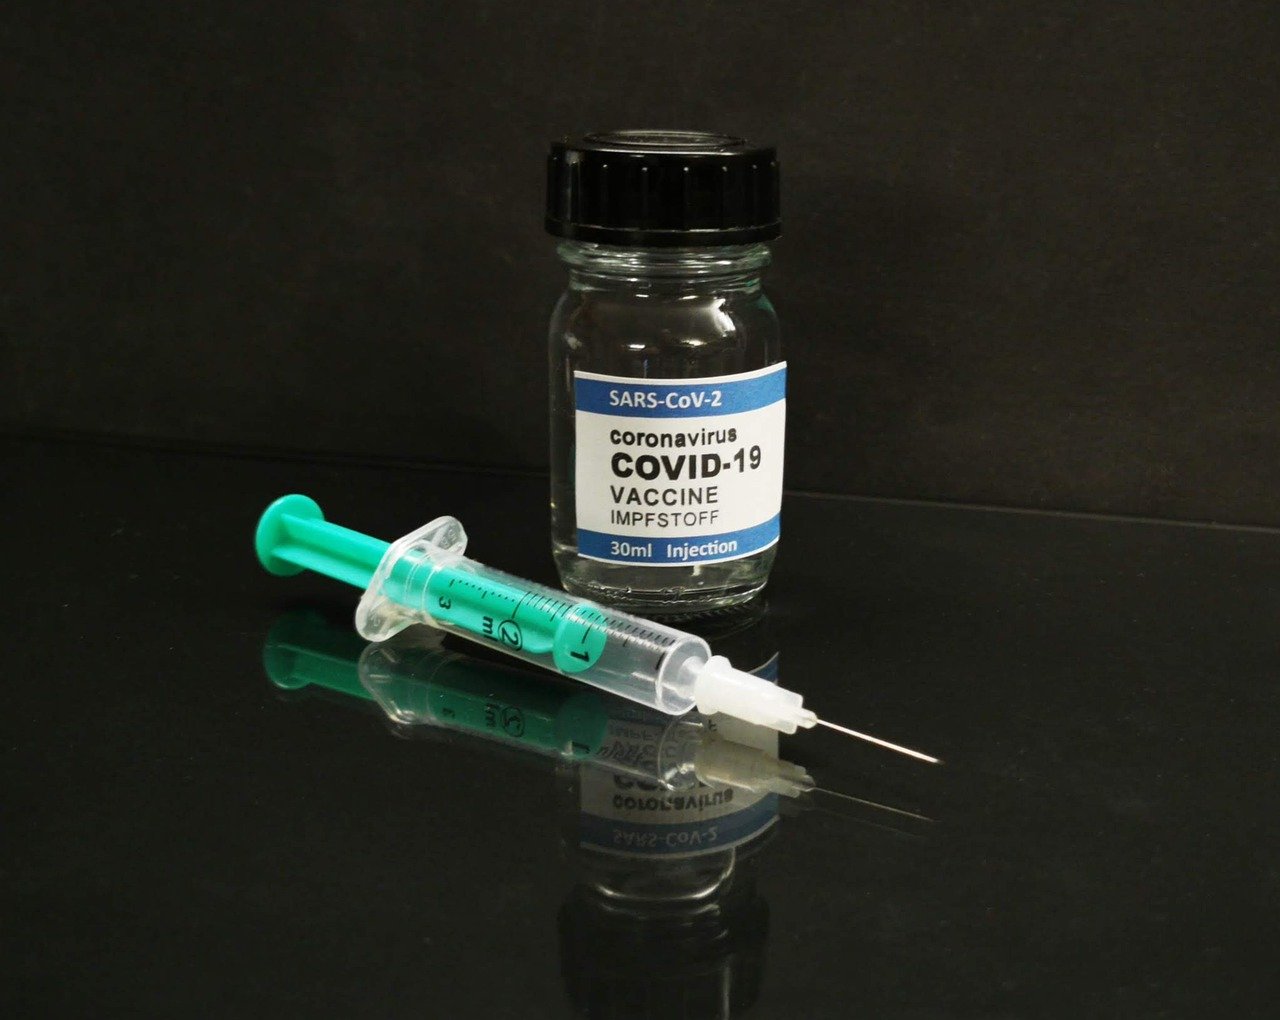 New York Lifts Covid-19 Restrictions: 70 Percent Received First Vaccine Dose